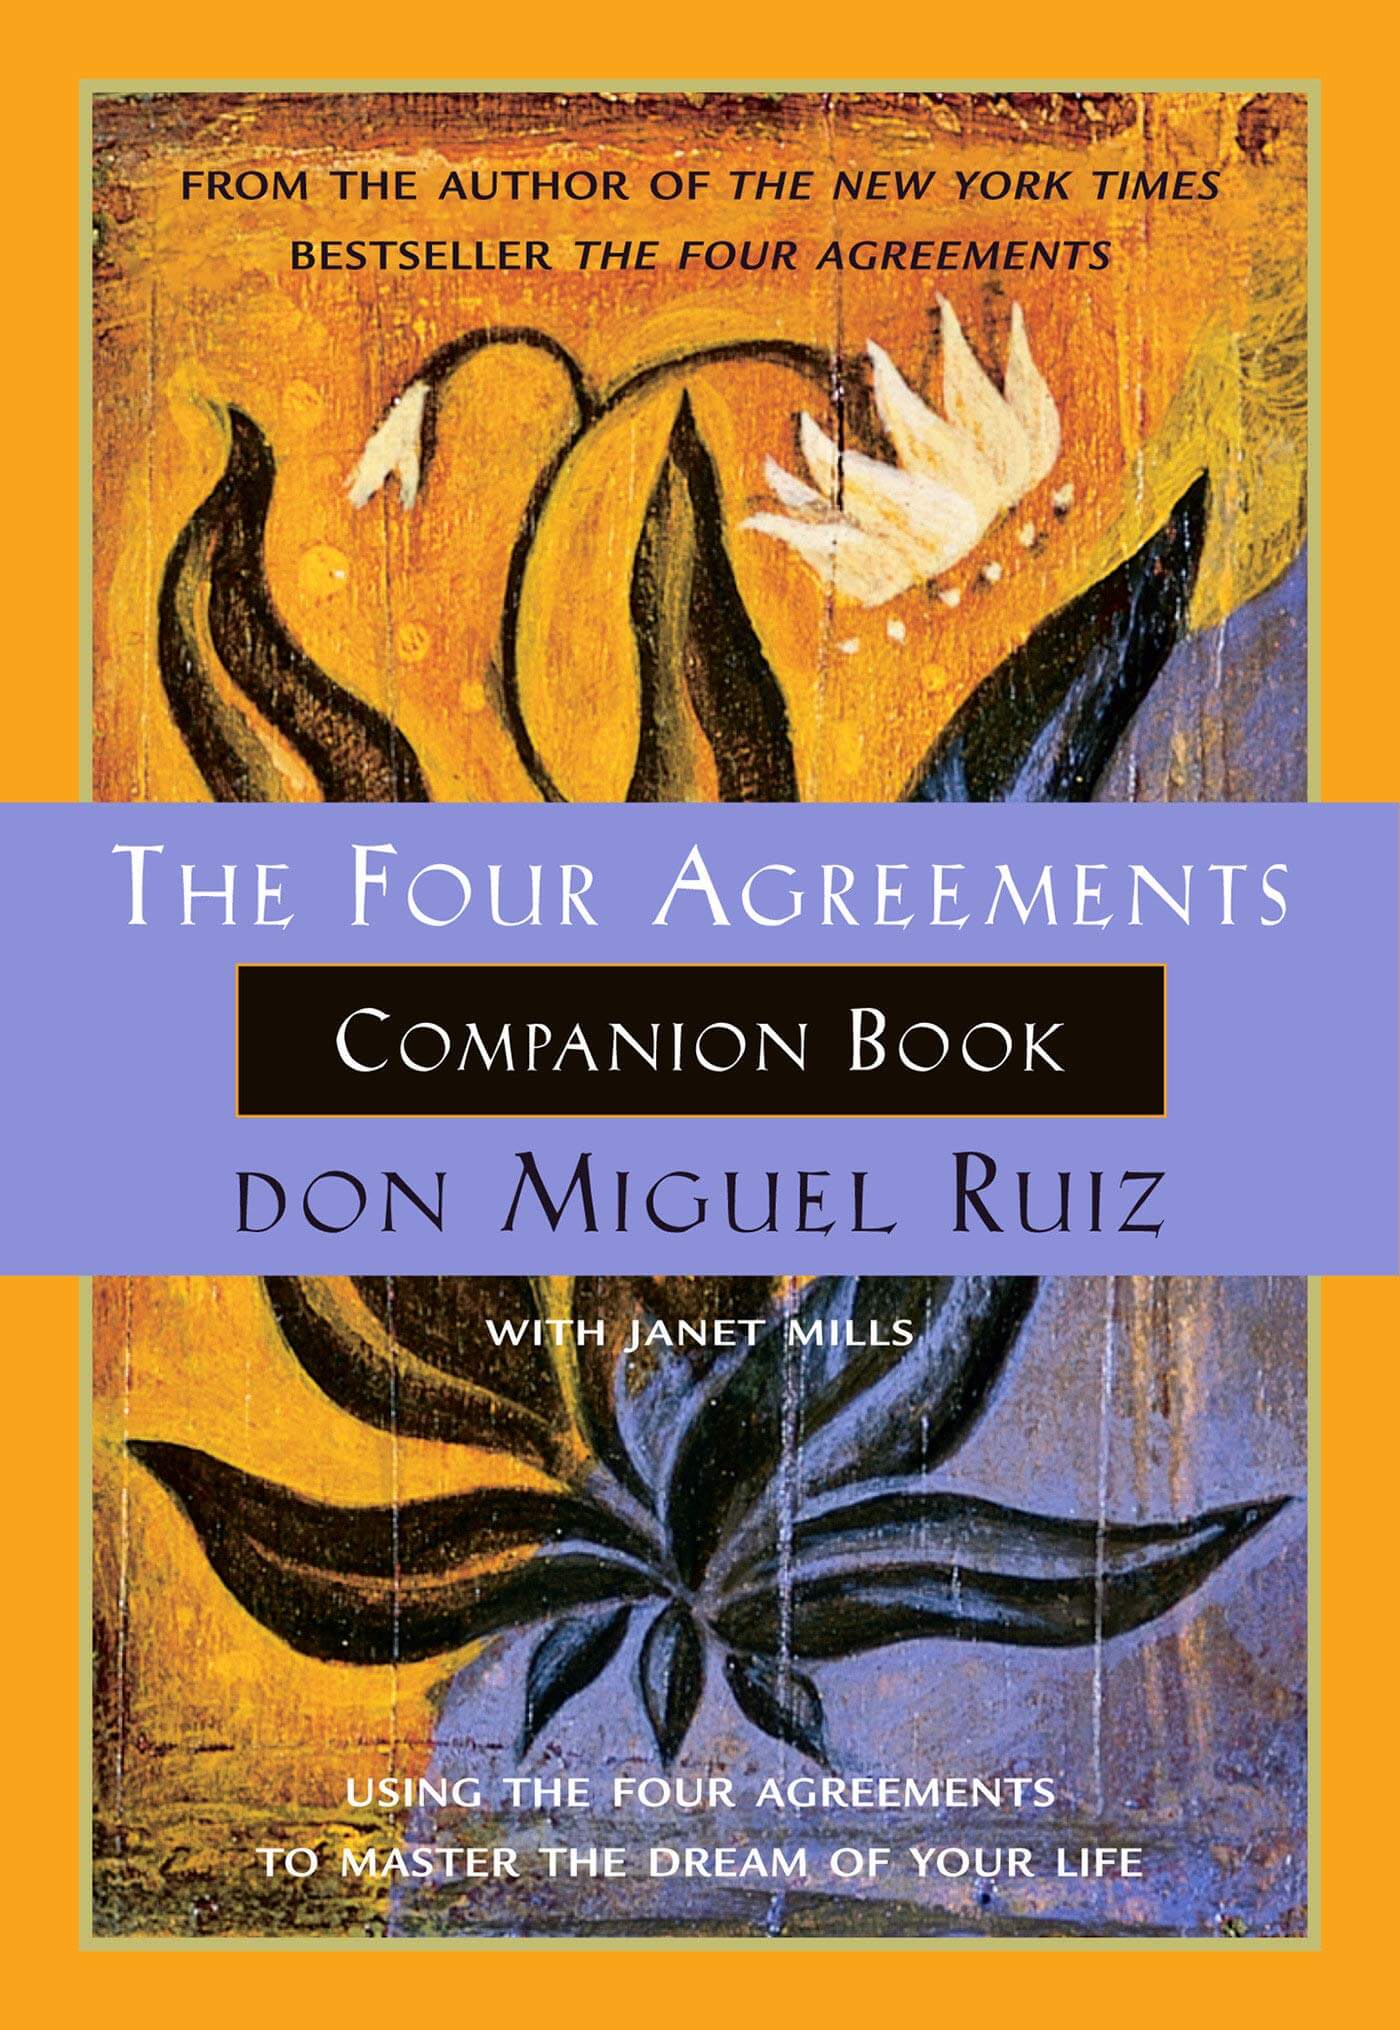 "The Four Agreements" by Don Miguel Ruiz